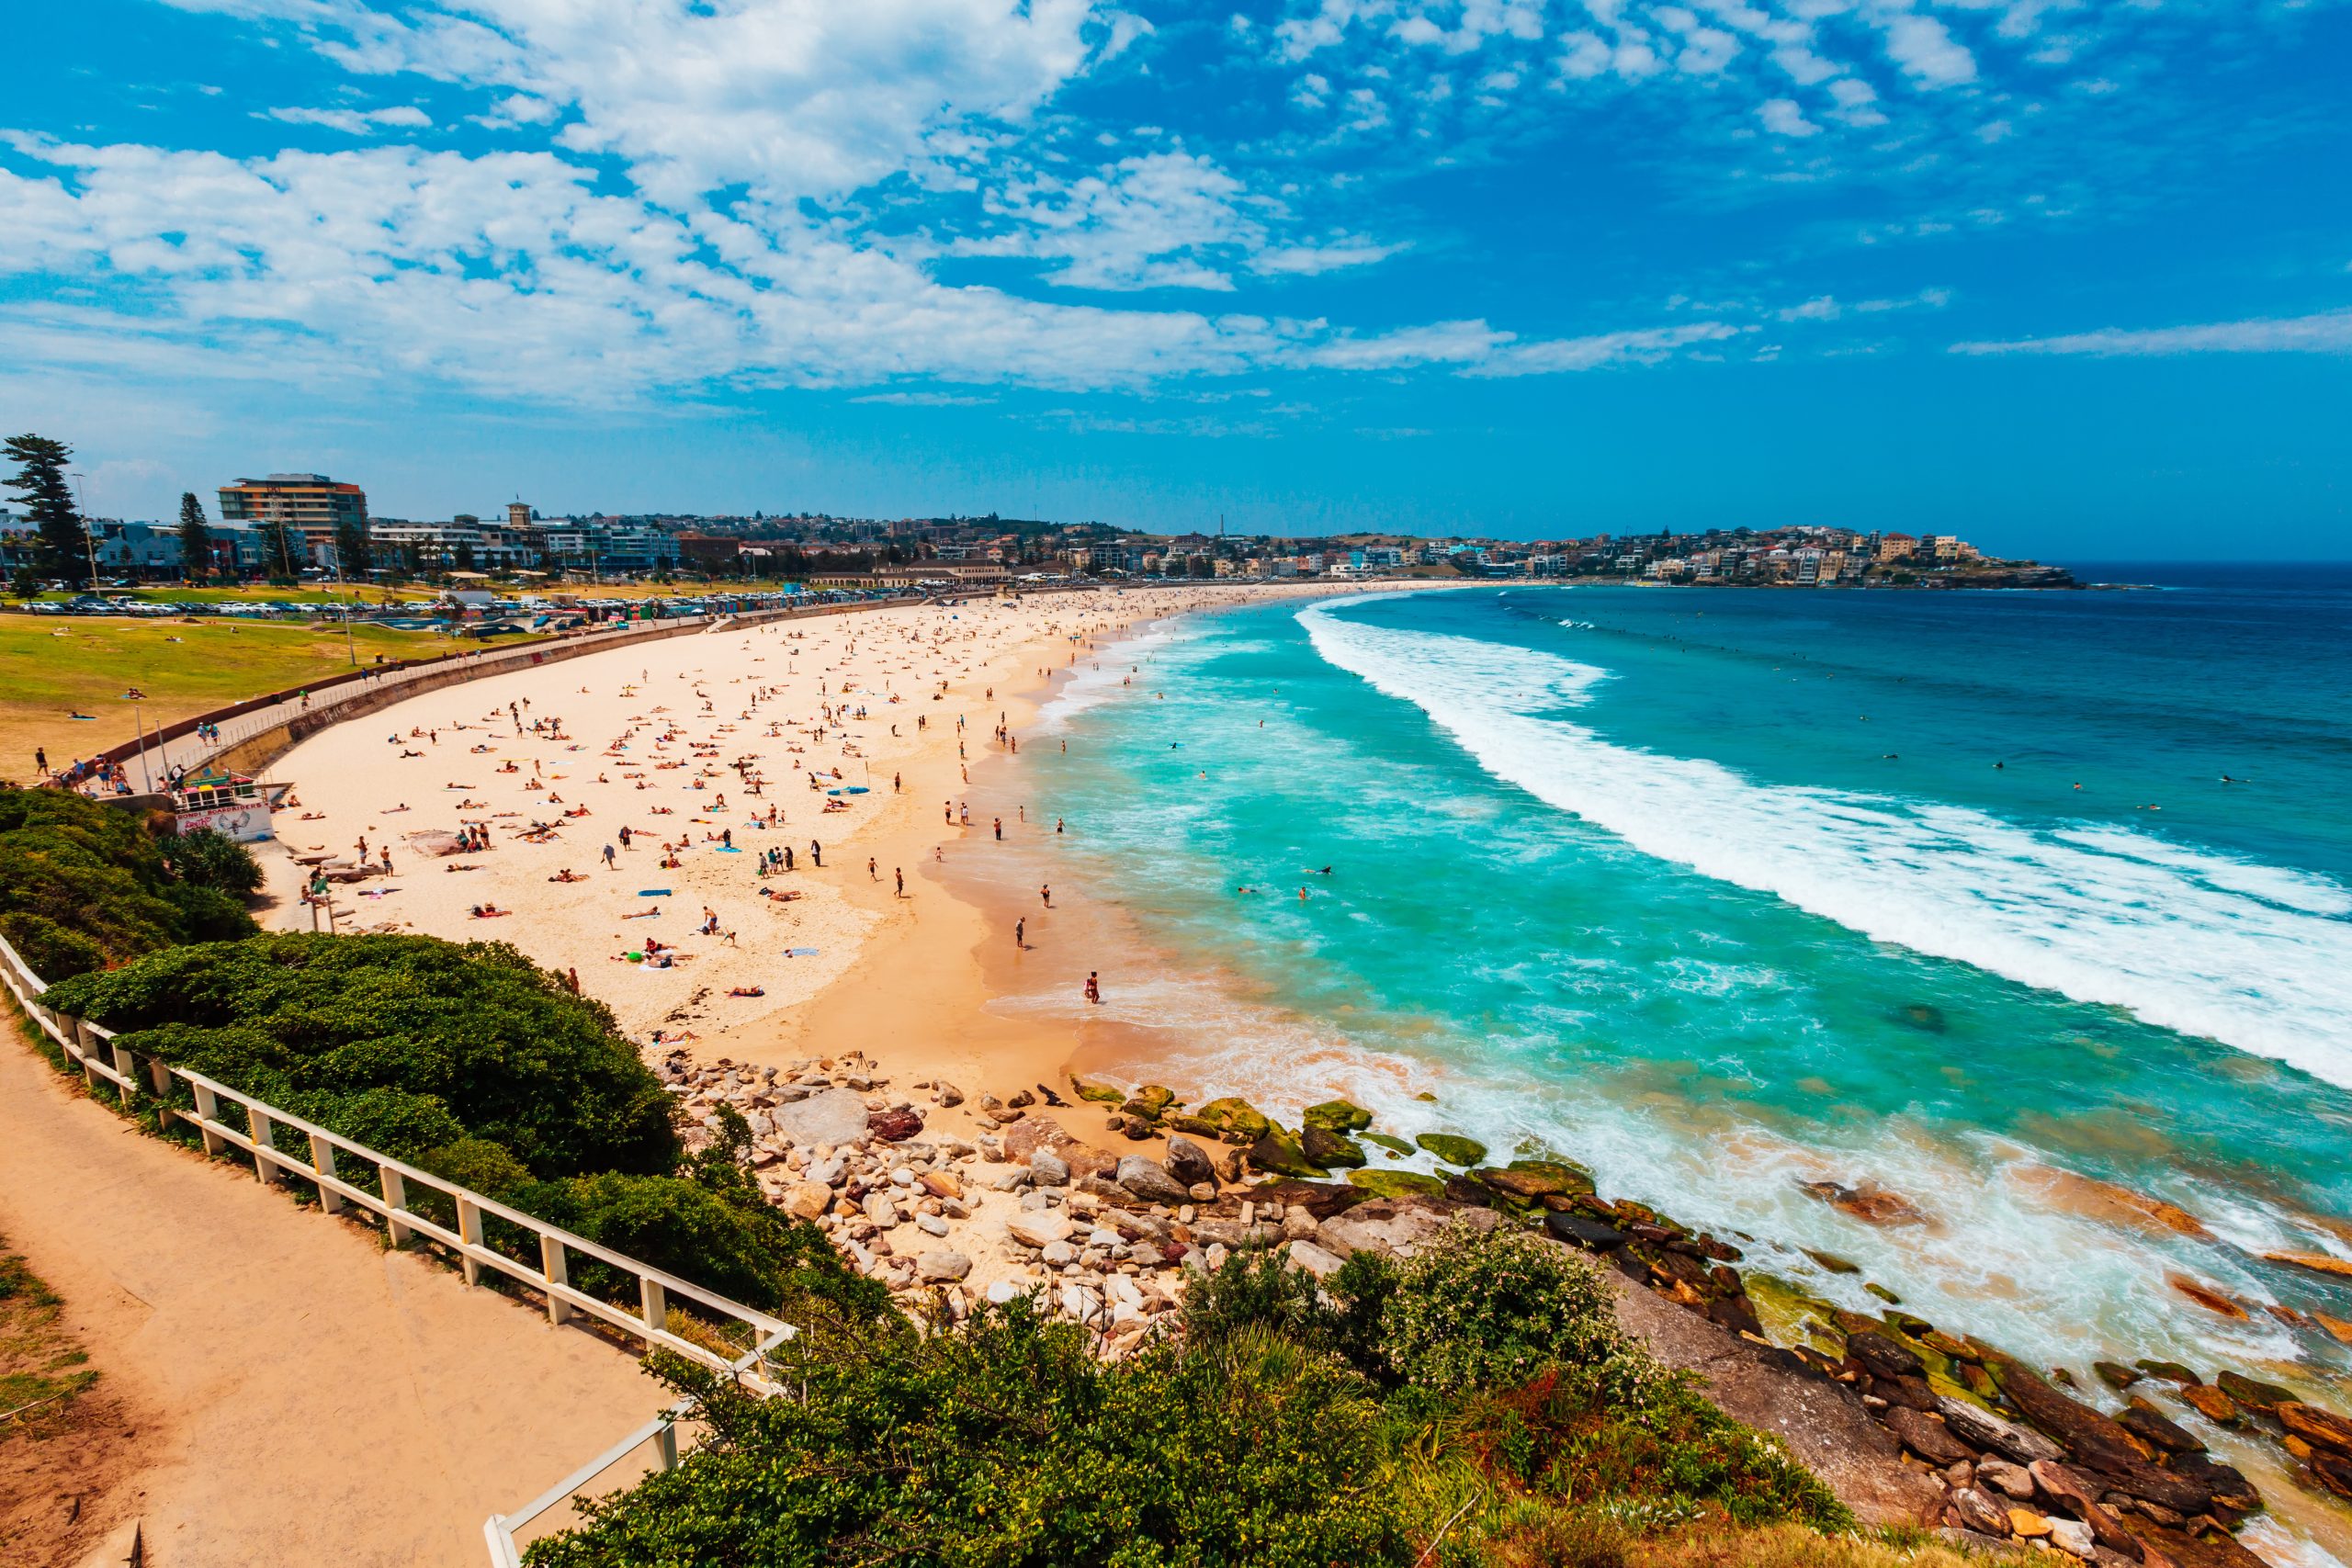 Sunny day at Bondi Beach in Sydney, NSW, Australia. The beach is full of people and the water is bright blue.